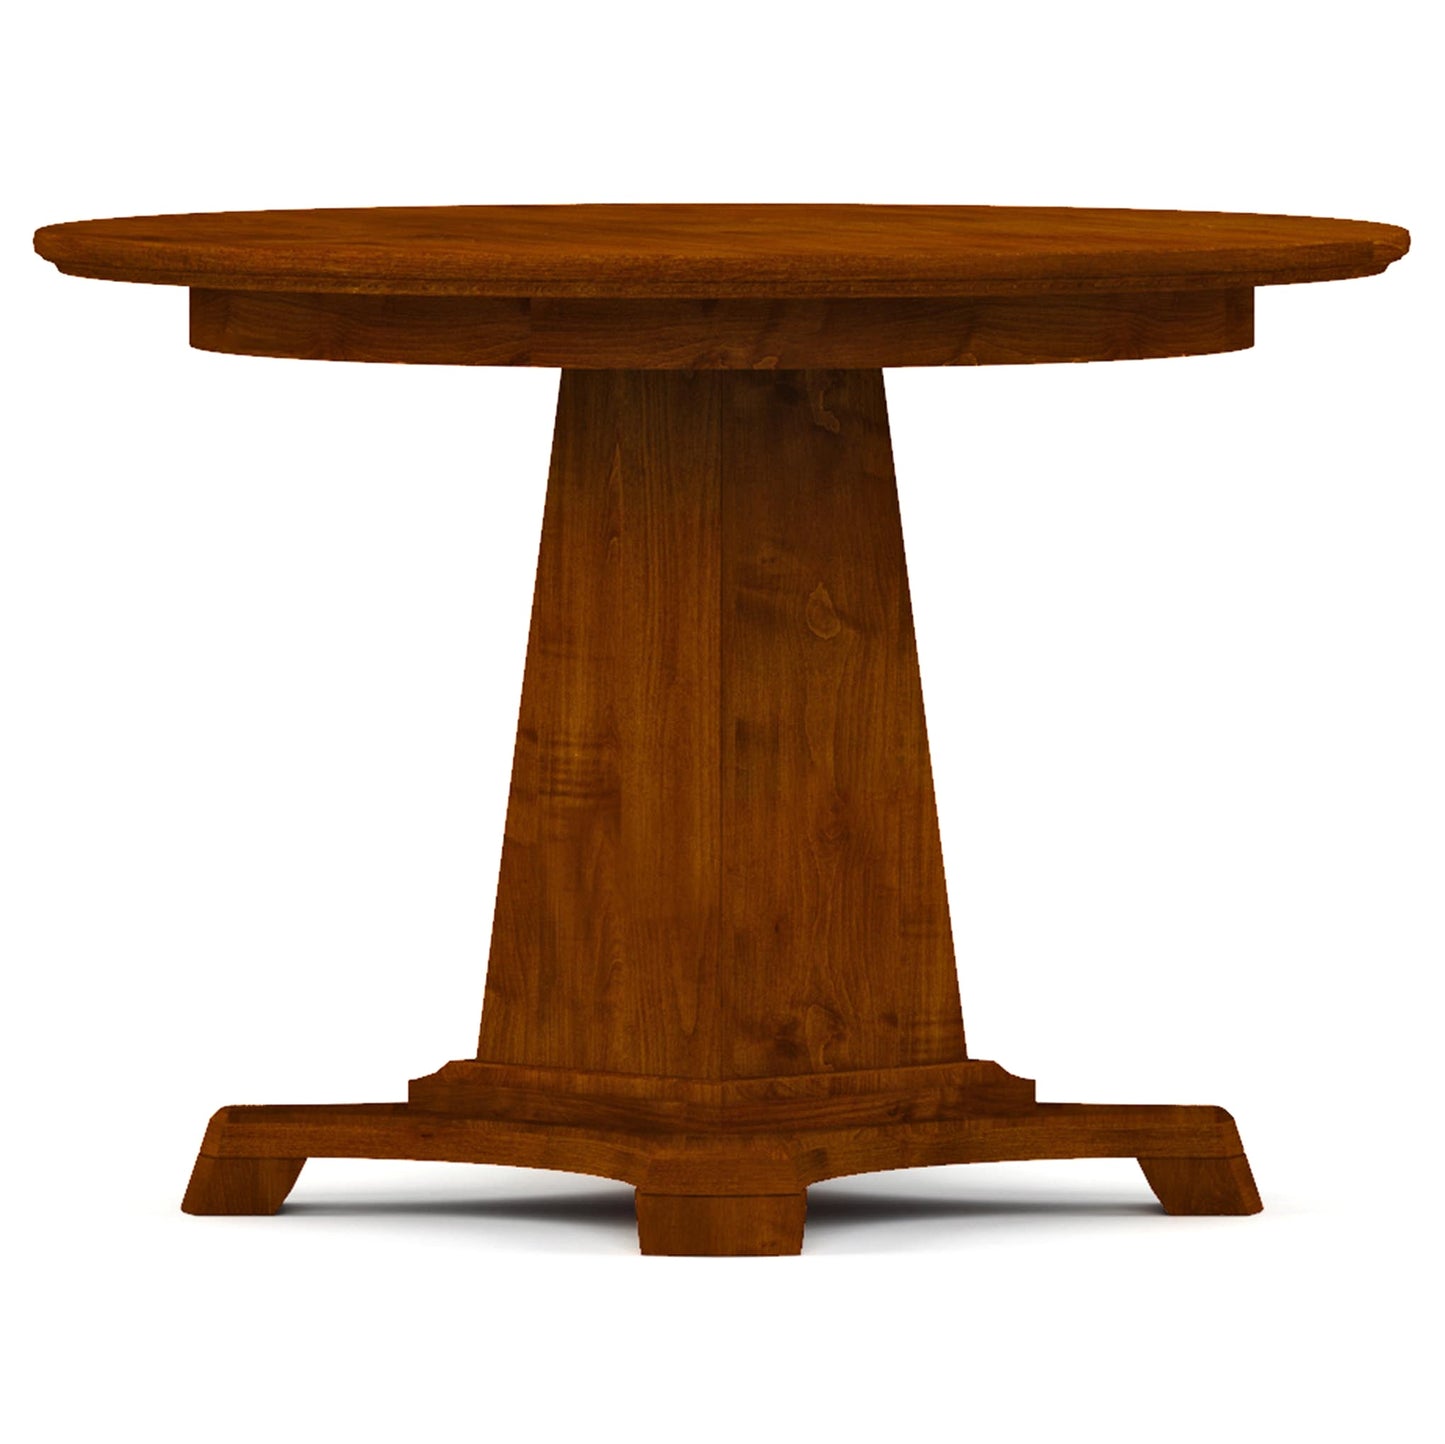 Revere 42-inch Round Dining Table